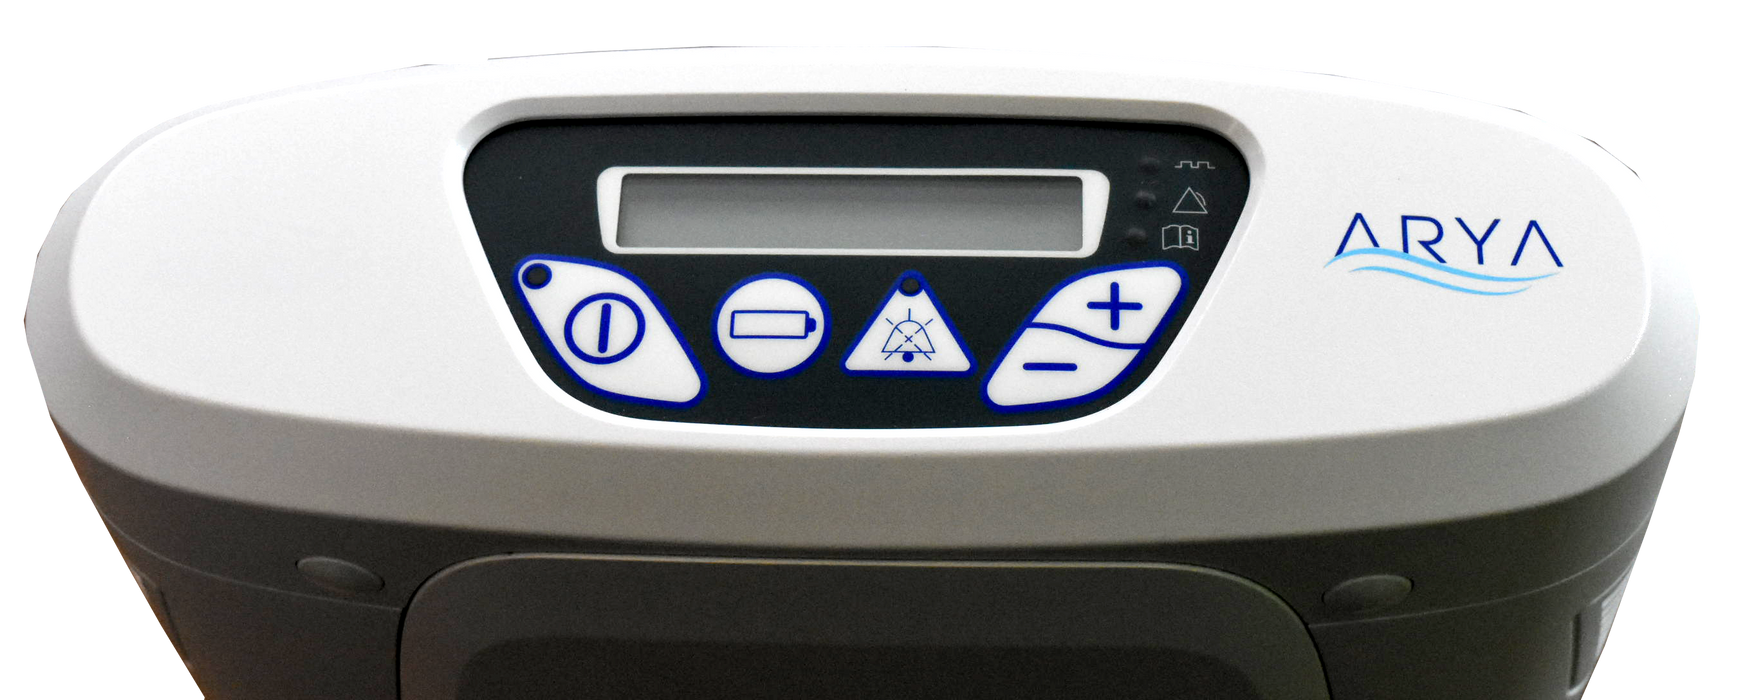 Arya P5 portable oxygen concentrator controls and LCD screen